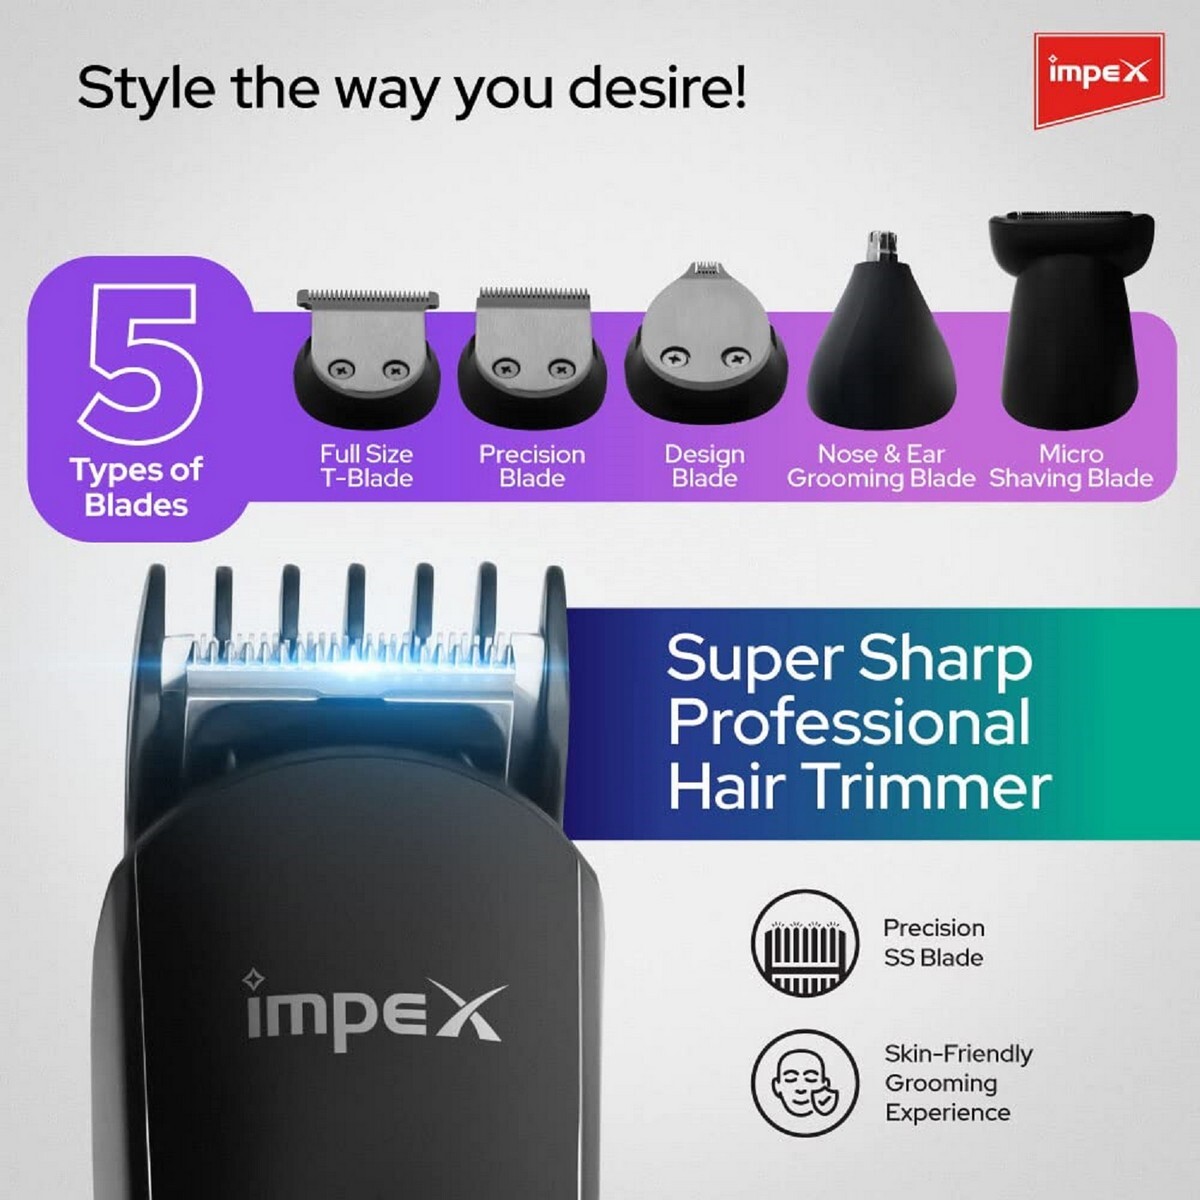 Impex GK 402 8-in-One Professional Multi Grooming and Trimmer Kit